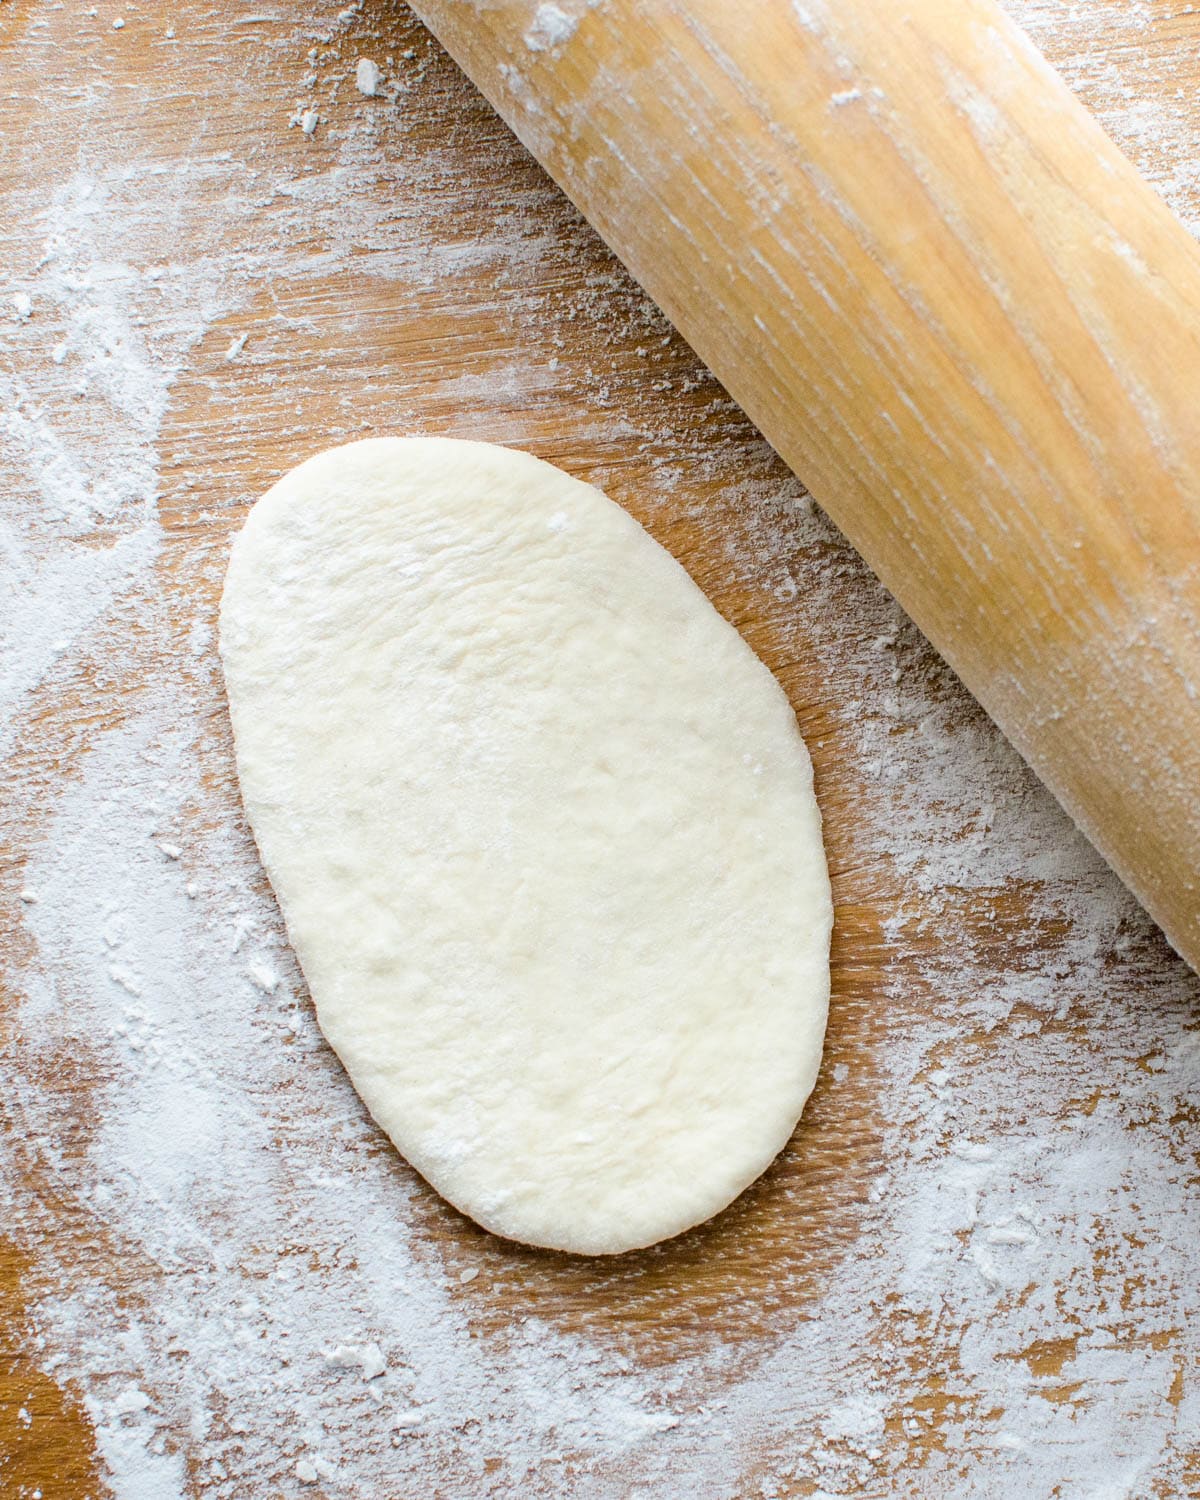 Roll the dough into ovals.